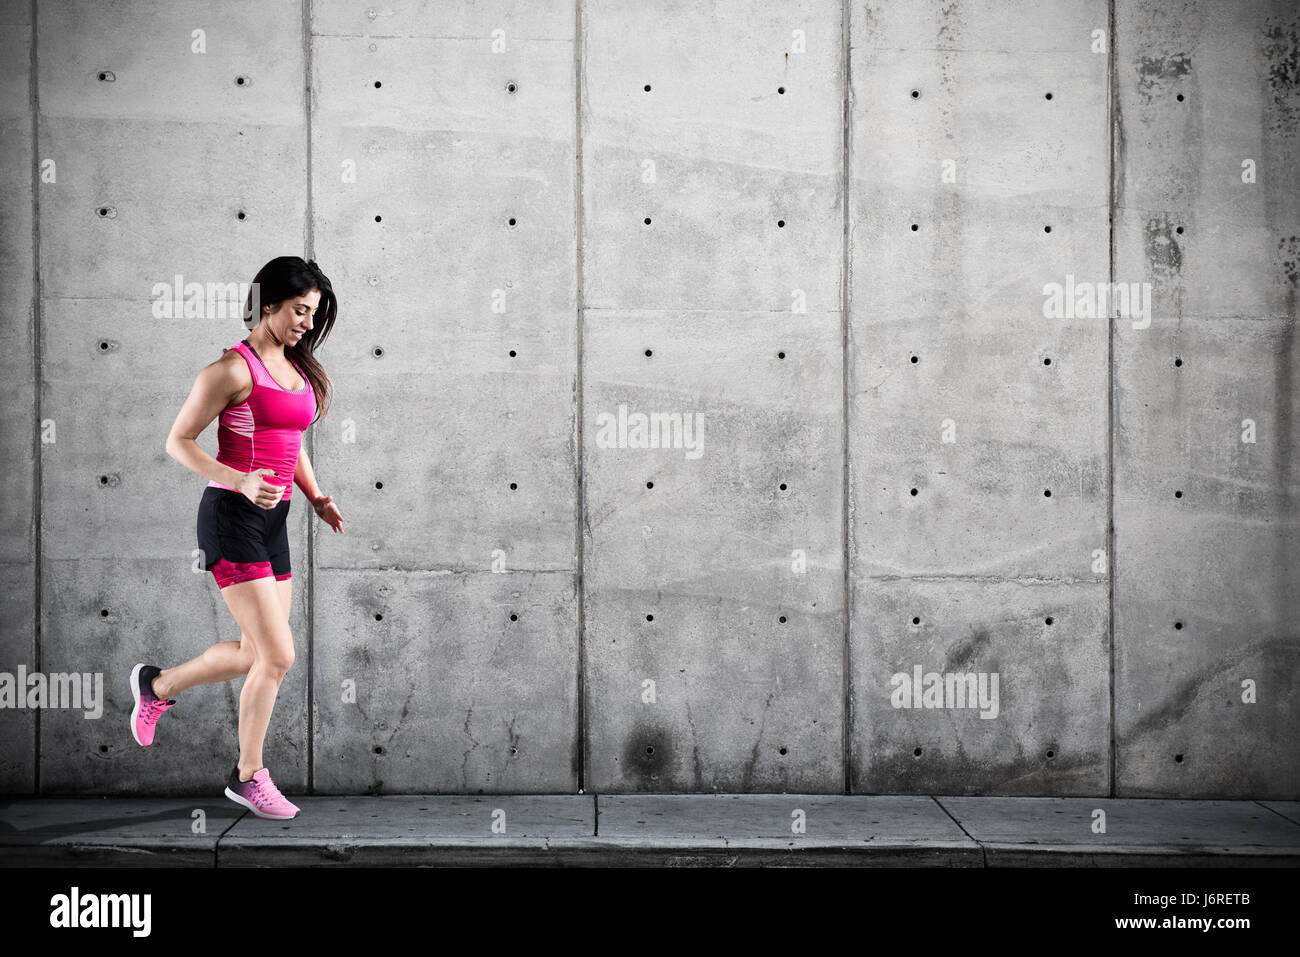 Athletic woman runner Stock Photo